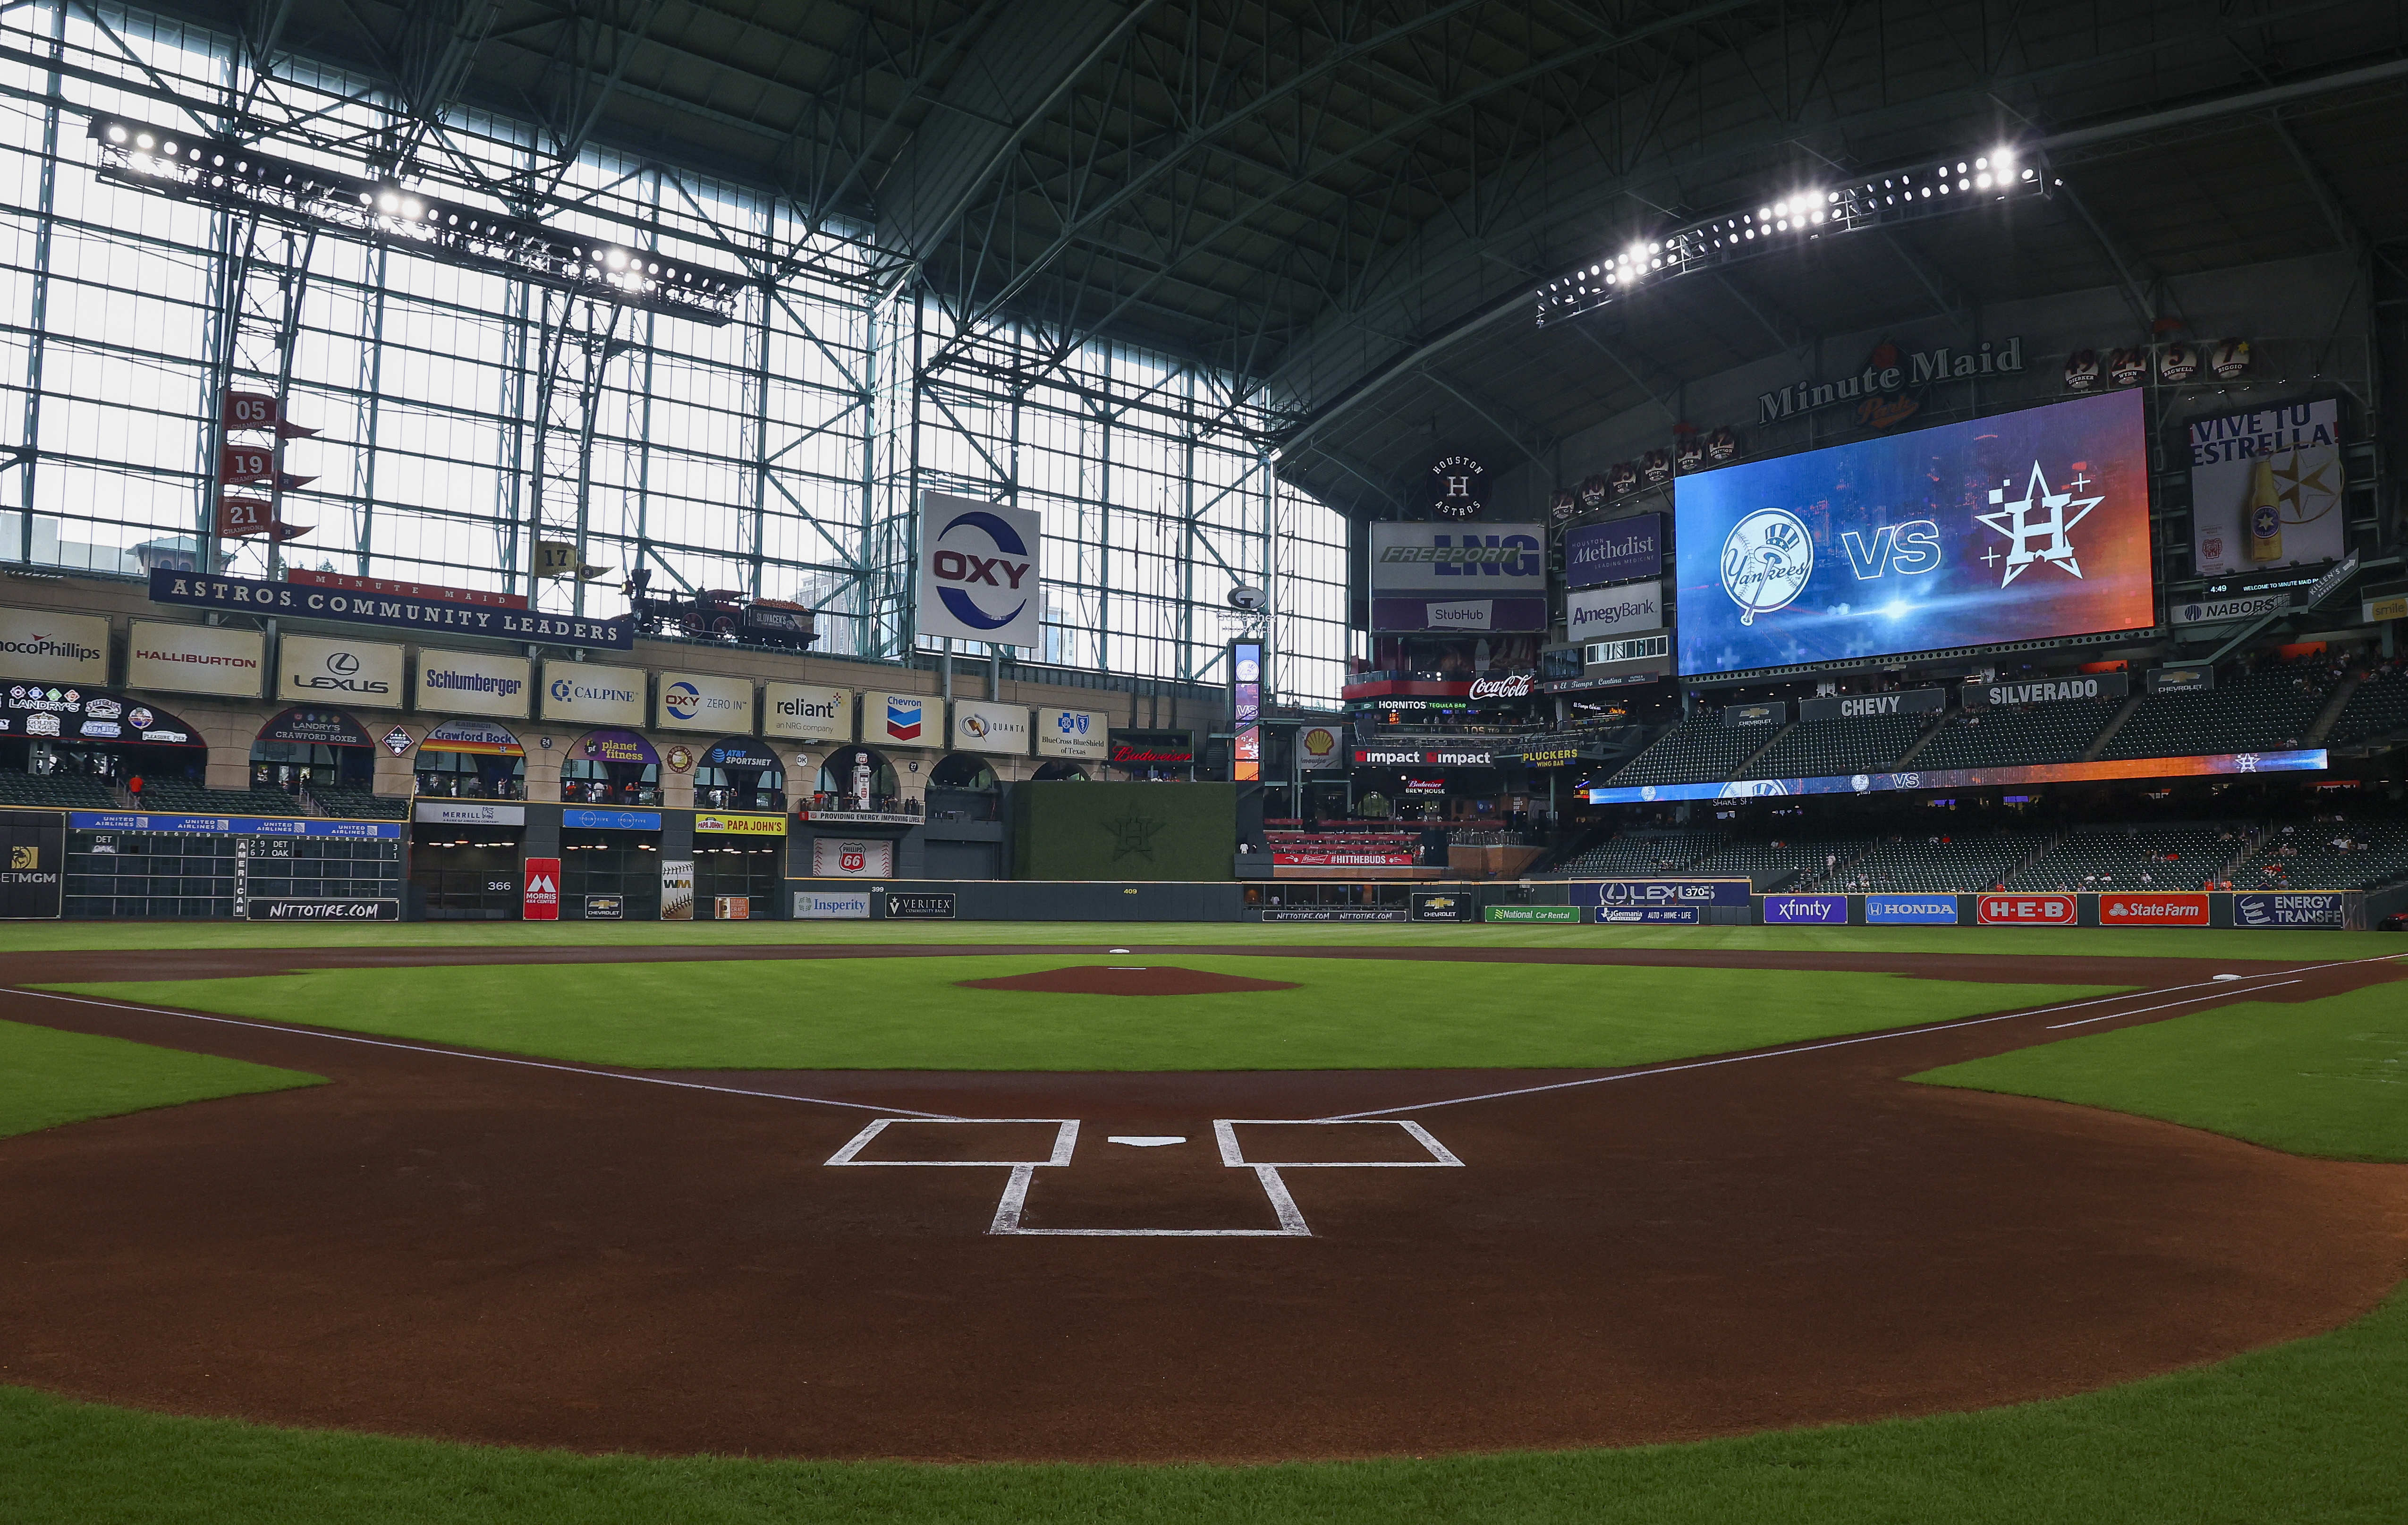 MLB: Game Two-New York Yankees at Houston Astros